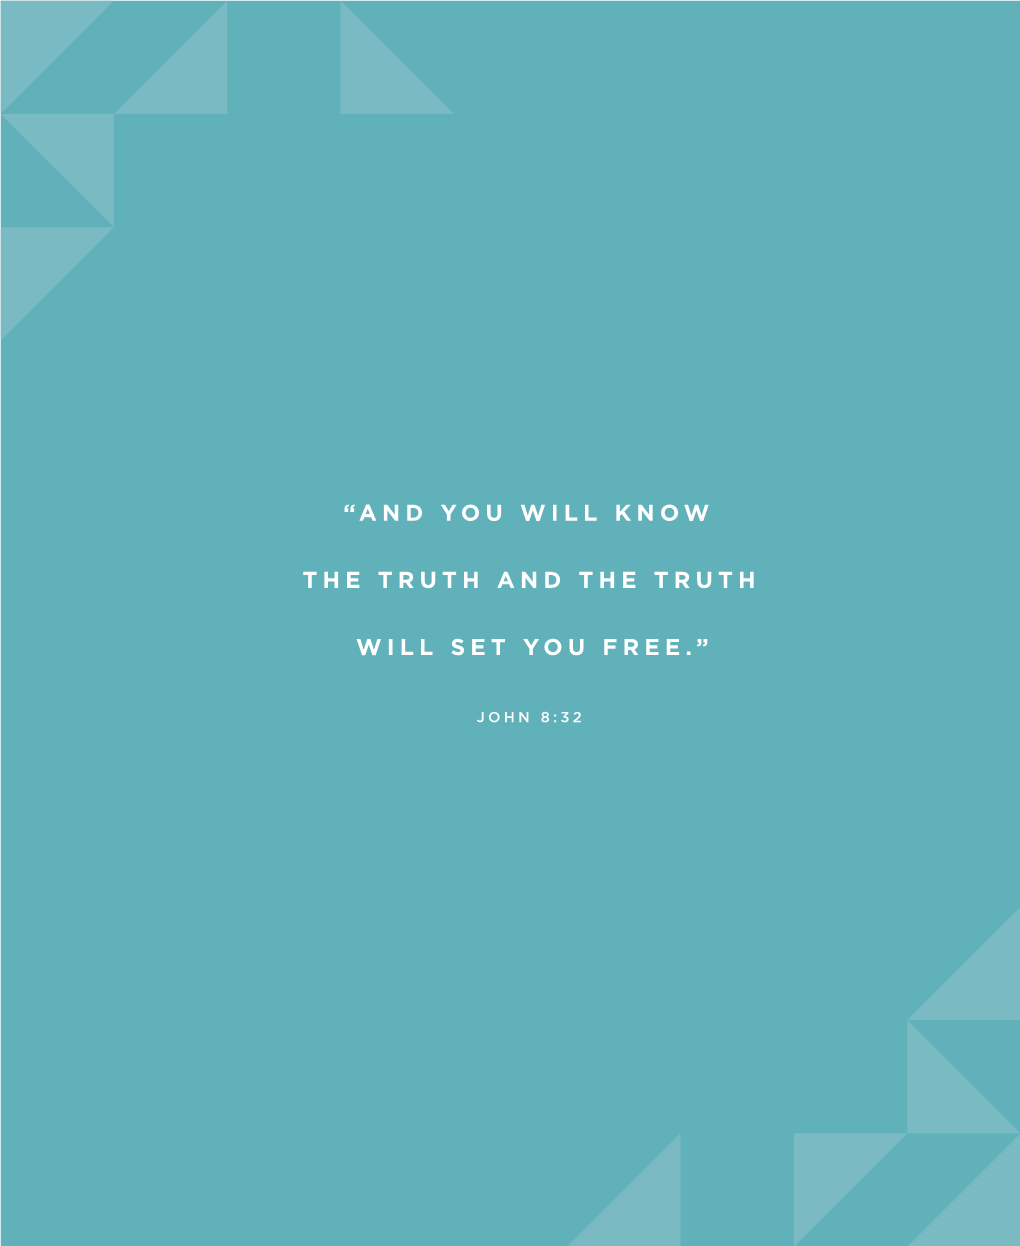 “And You Will Know the Truth and the Truth Will Set You